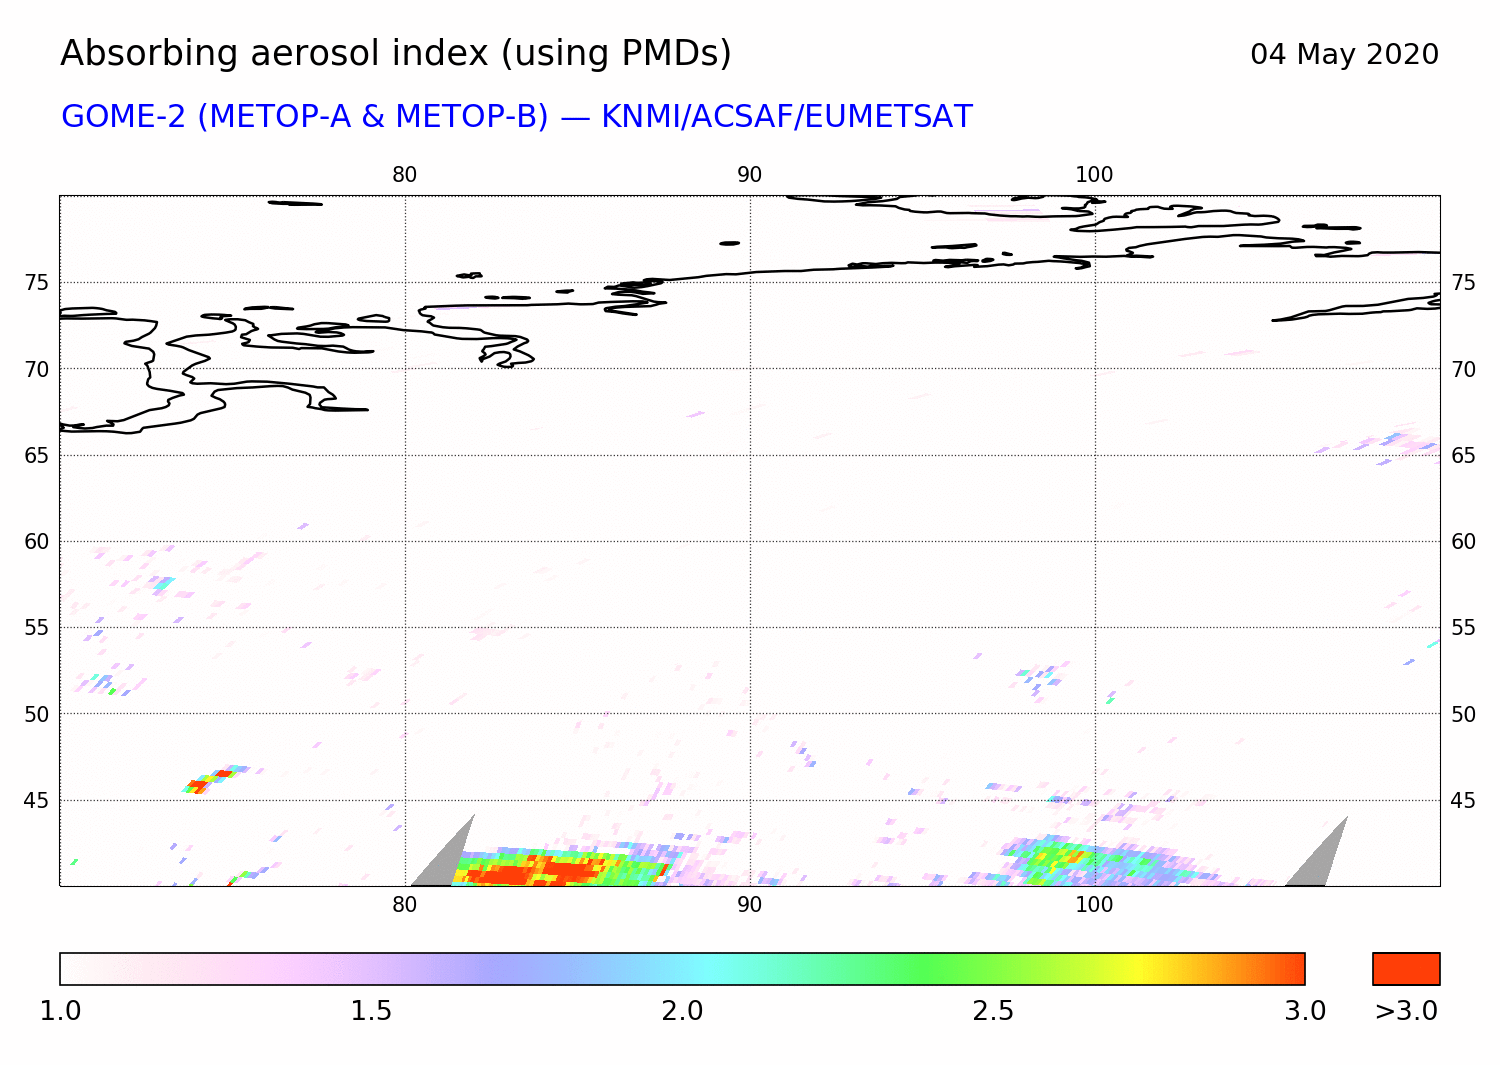 GOME-2 - Absorbing aerosol index of 04 May 2020